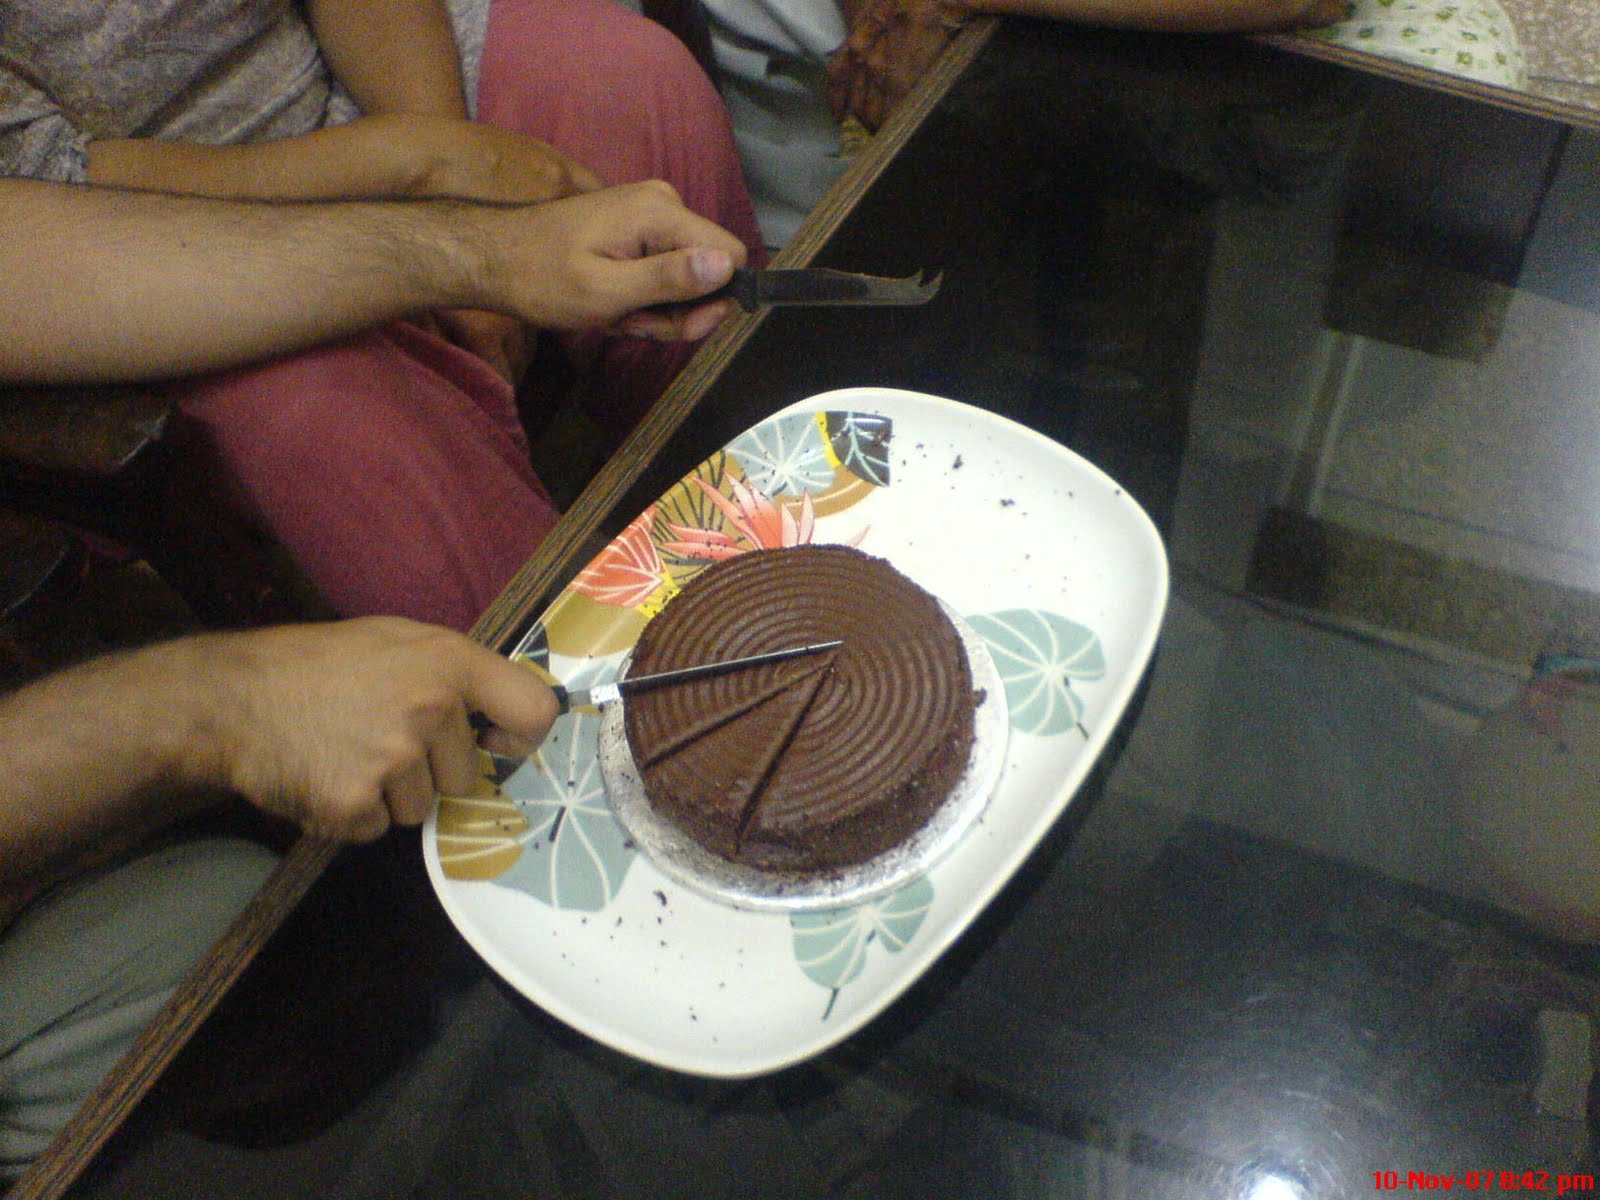 cool boy birthday cake Simple chocolate cake with rounded design being cut by birthday boy.